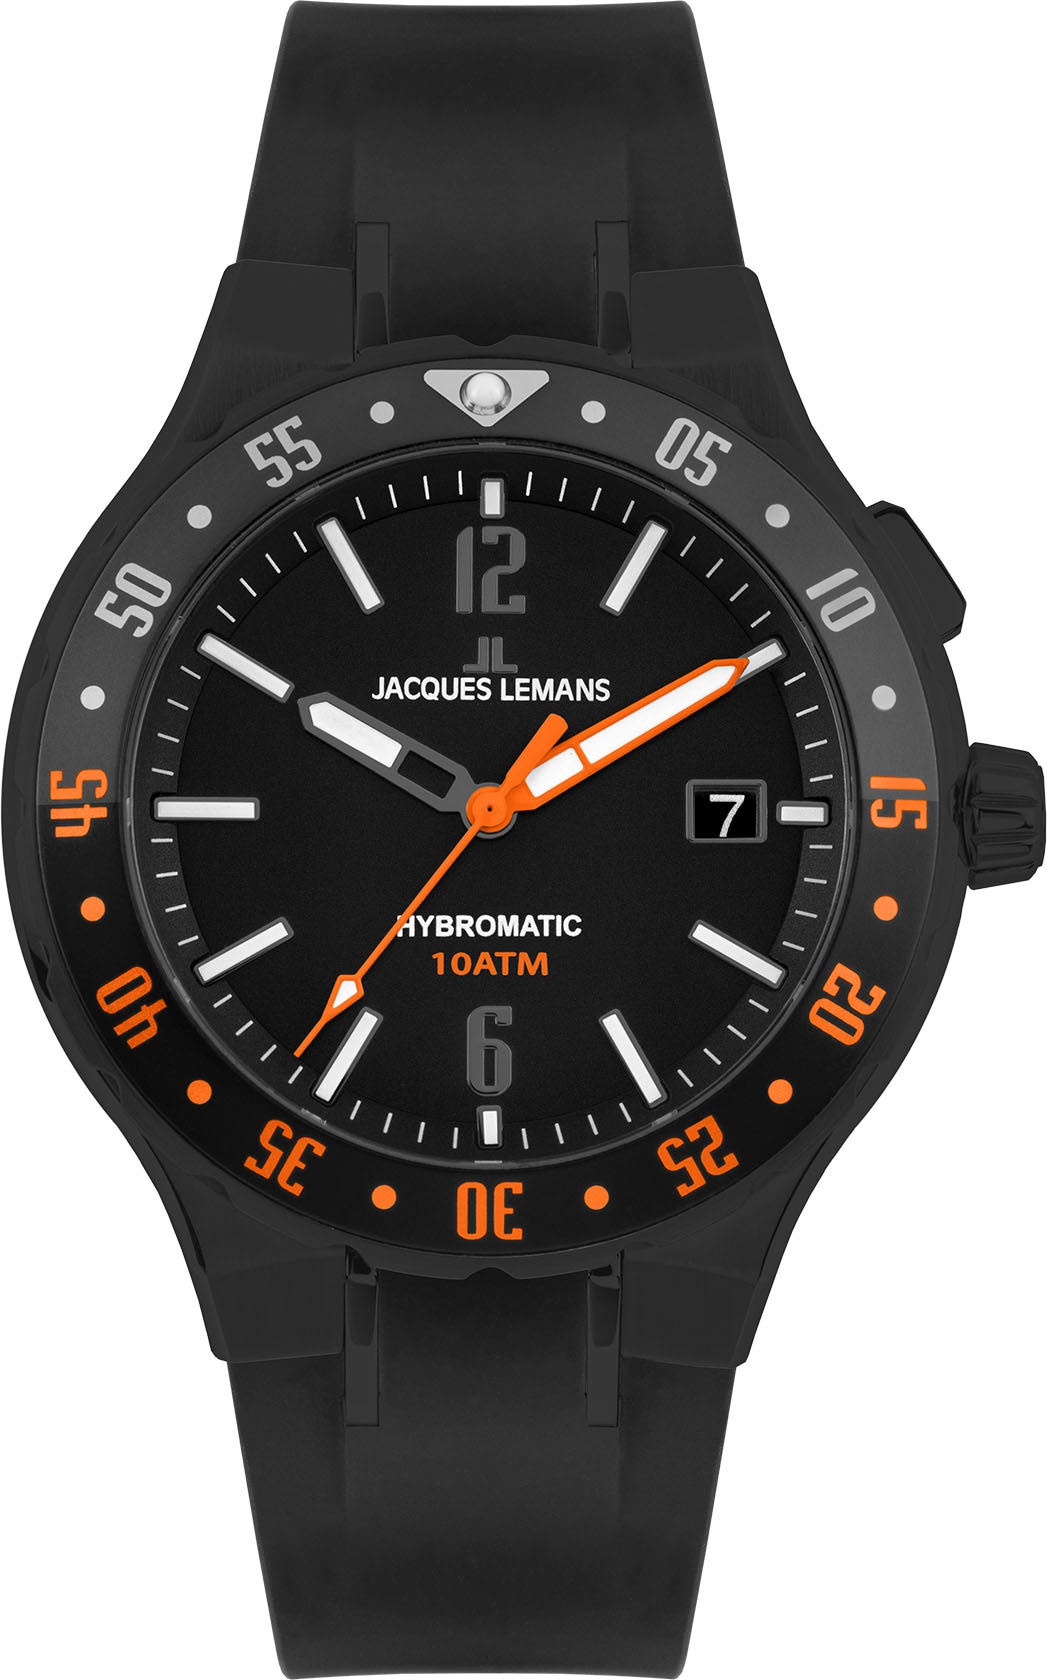 Lemans kaufen Jacques online Kineticuhr OTTO 1-2130B« »Hybromatic, bei